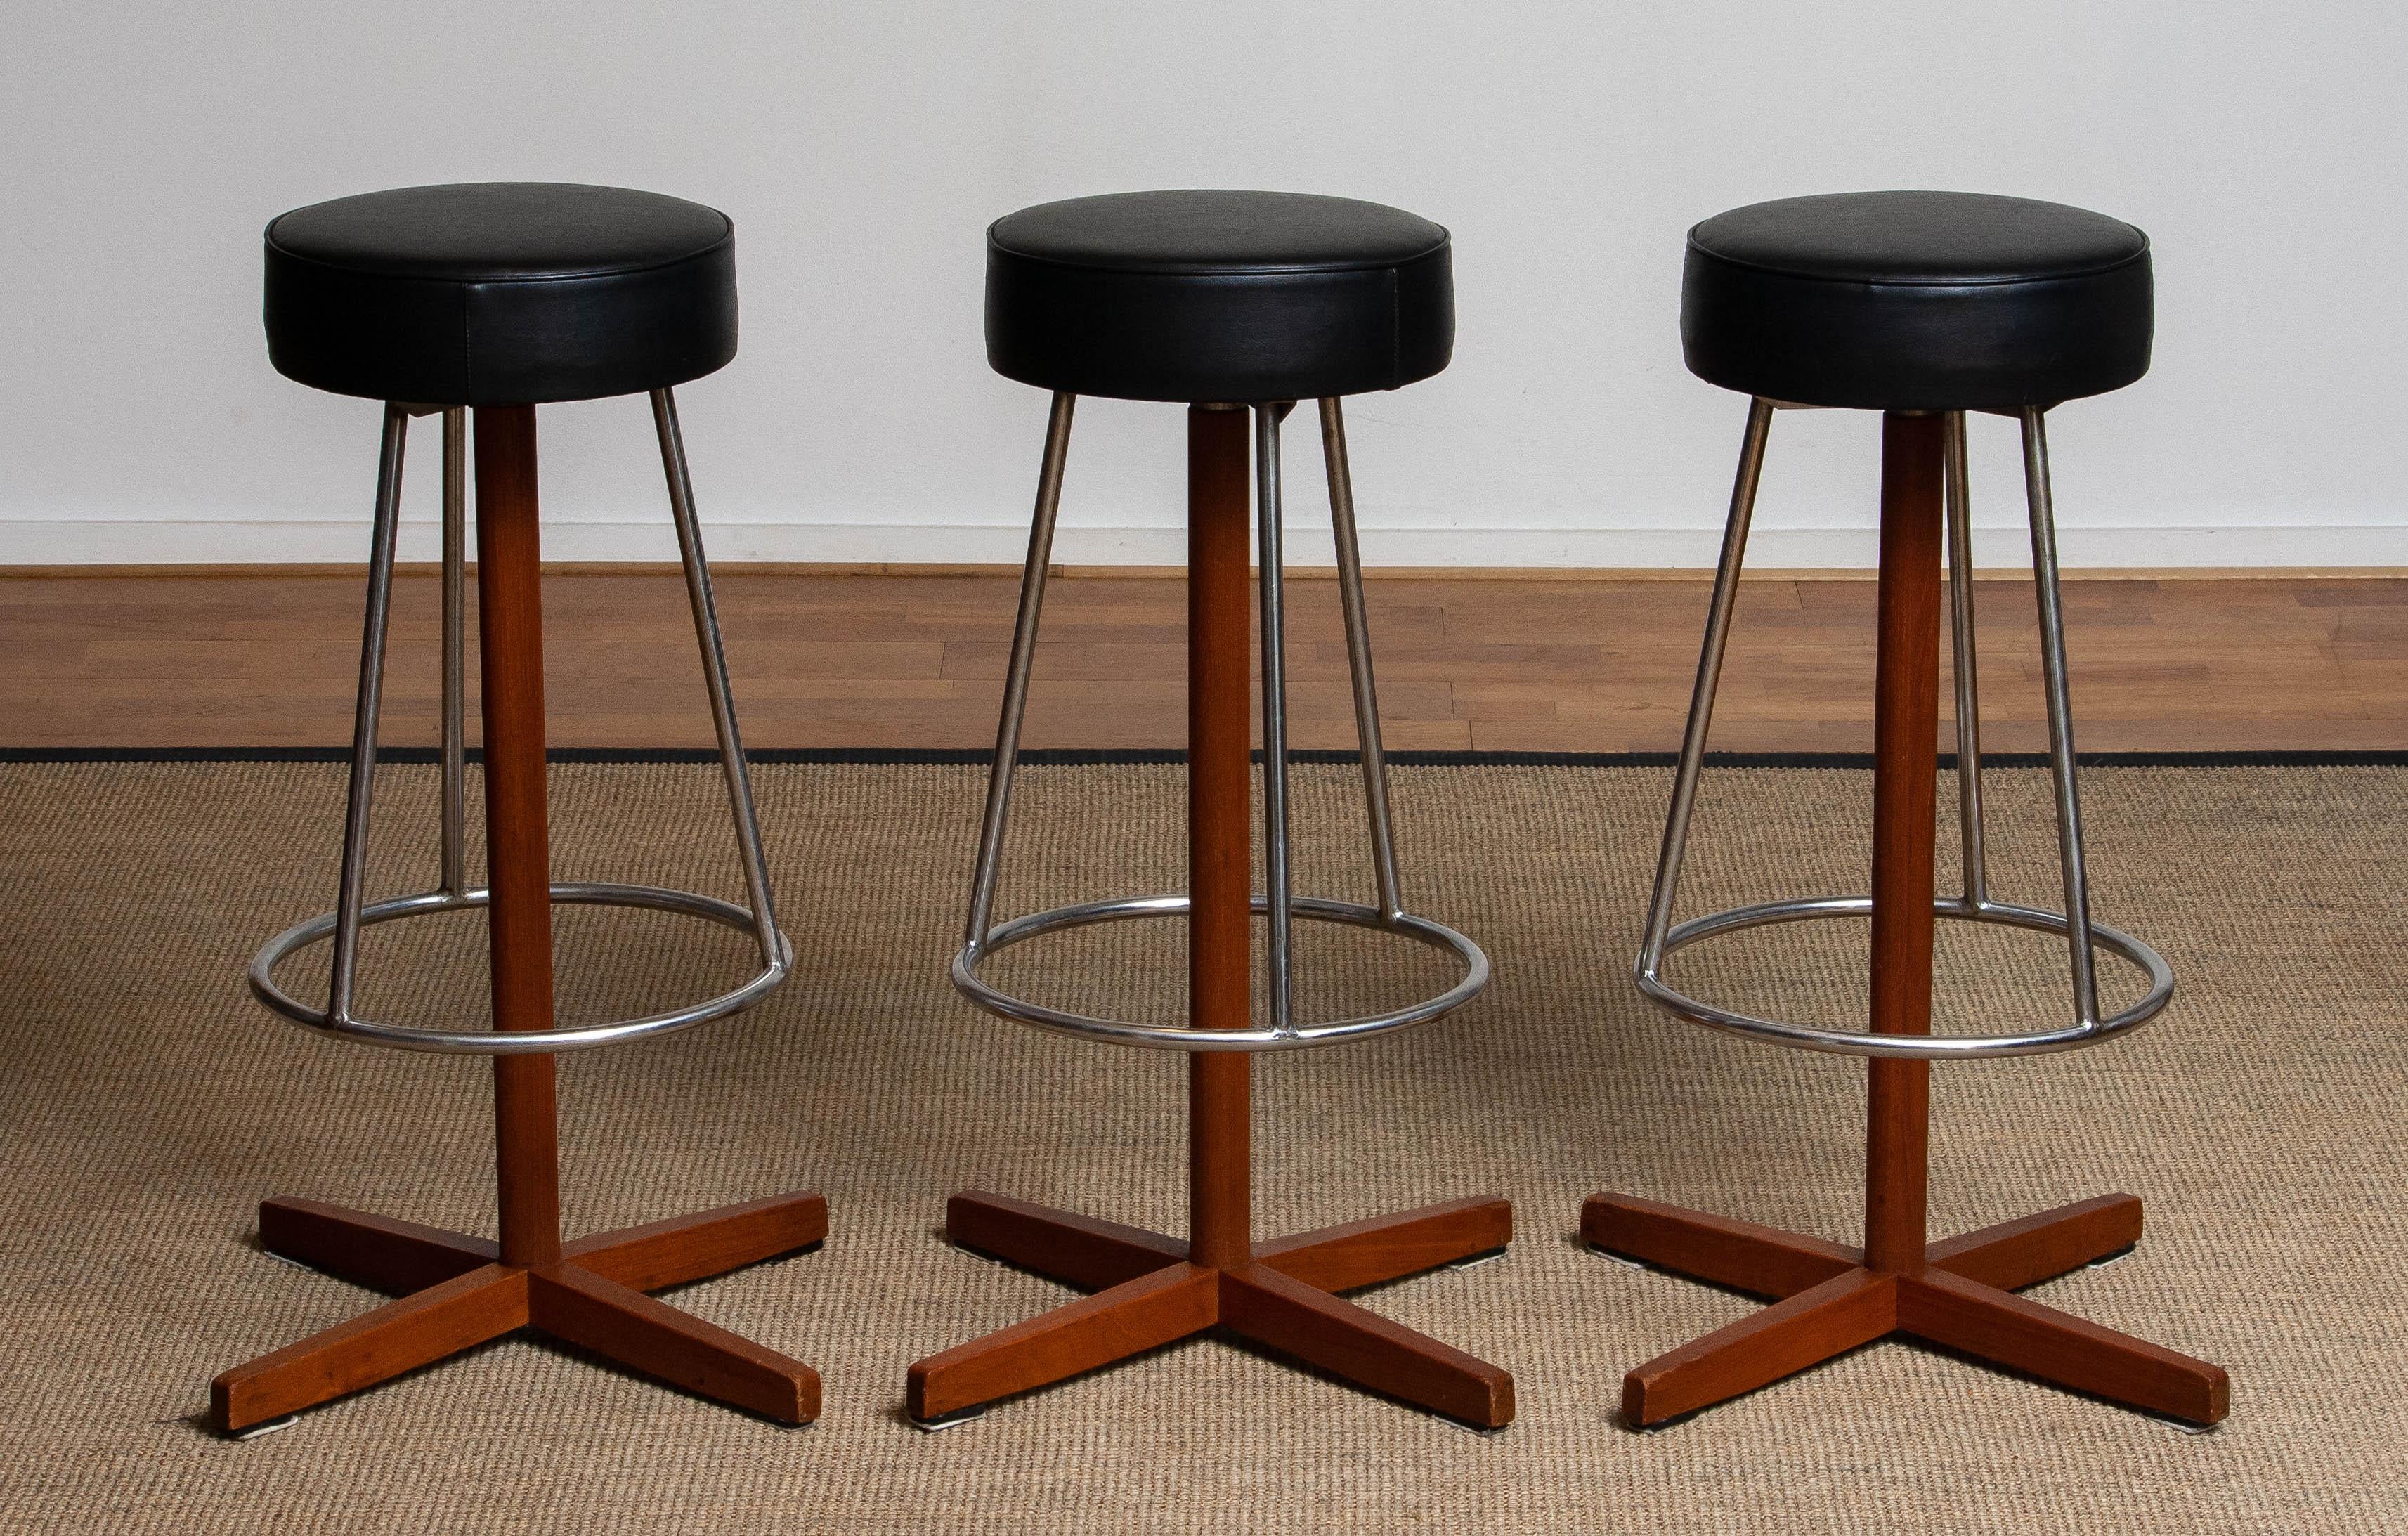 Very beautiful set of three slim teak swivel bar stools by Börje Johanson for Johanson Design Sweden in allover very good condition. All three are upholstered with black faux leather.

Please note!
Because Shipping Costs highly fluctuate daily, we